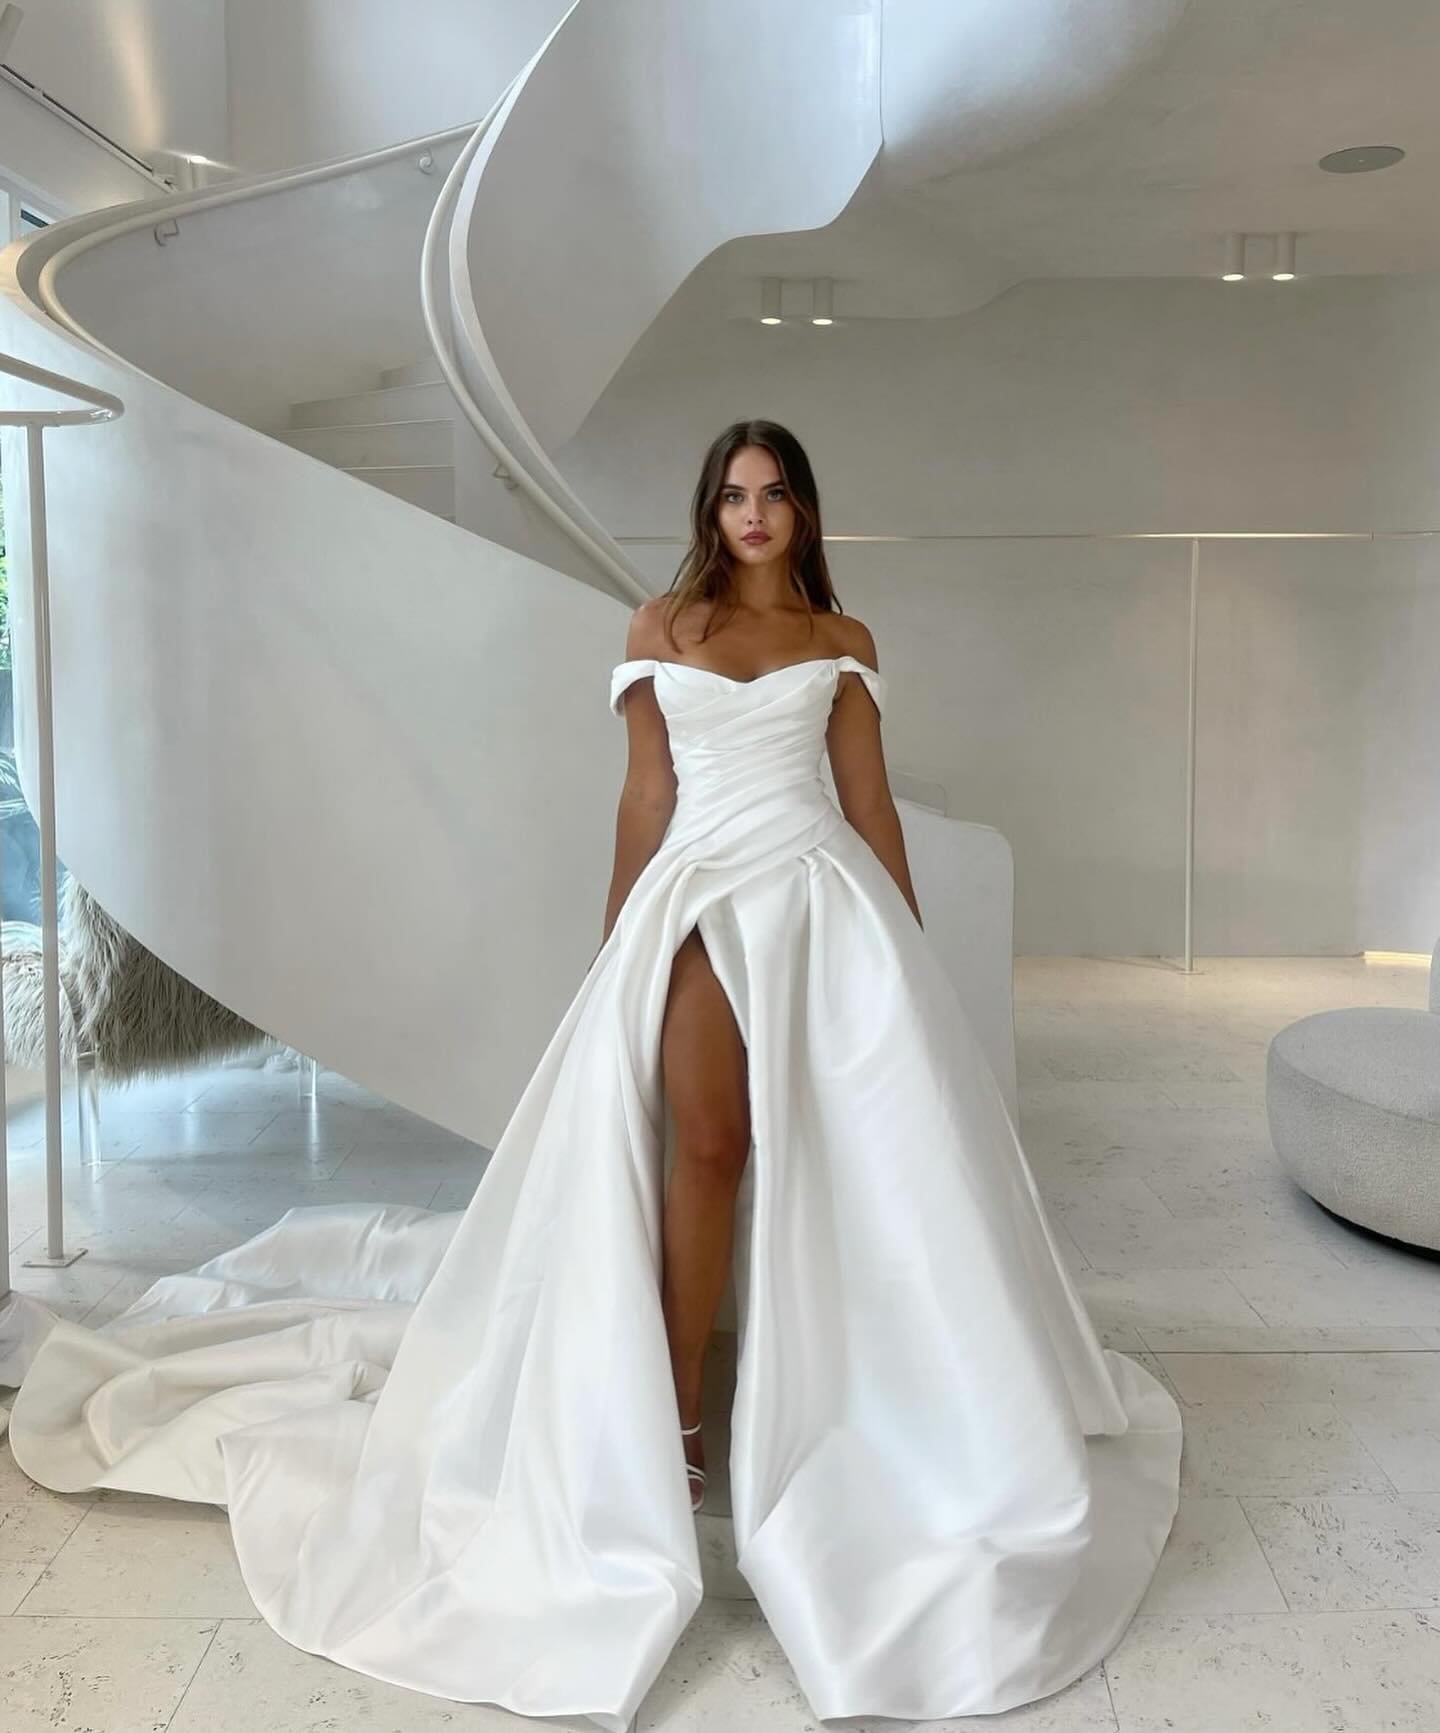 Can you blame us for being obsessed with this new @pallascoutureprivee gown? 🤤

The iconic Australian bridal name, @pallascouture, is one of our many exclusive designers available at Marie Gabriel Bridal! 

Make your appointment to experience the be